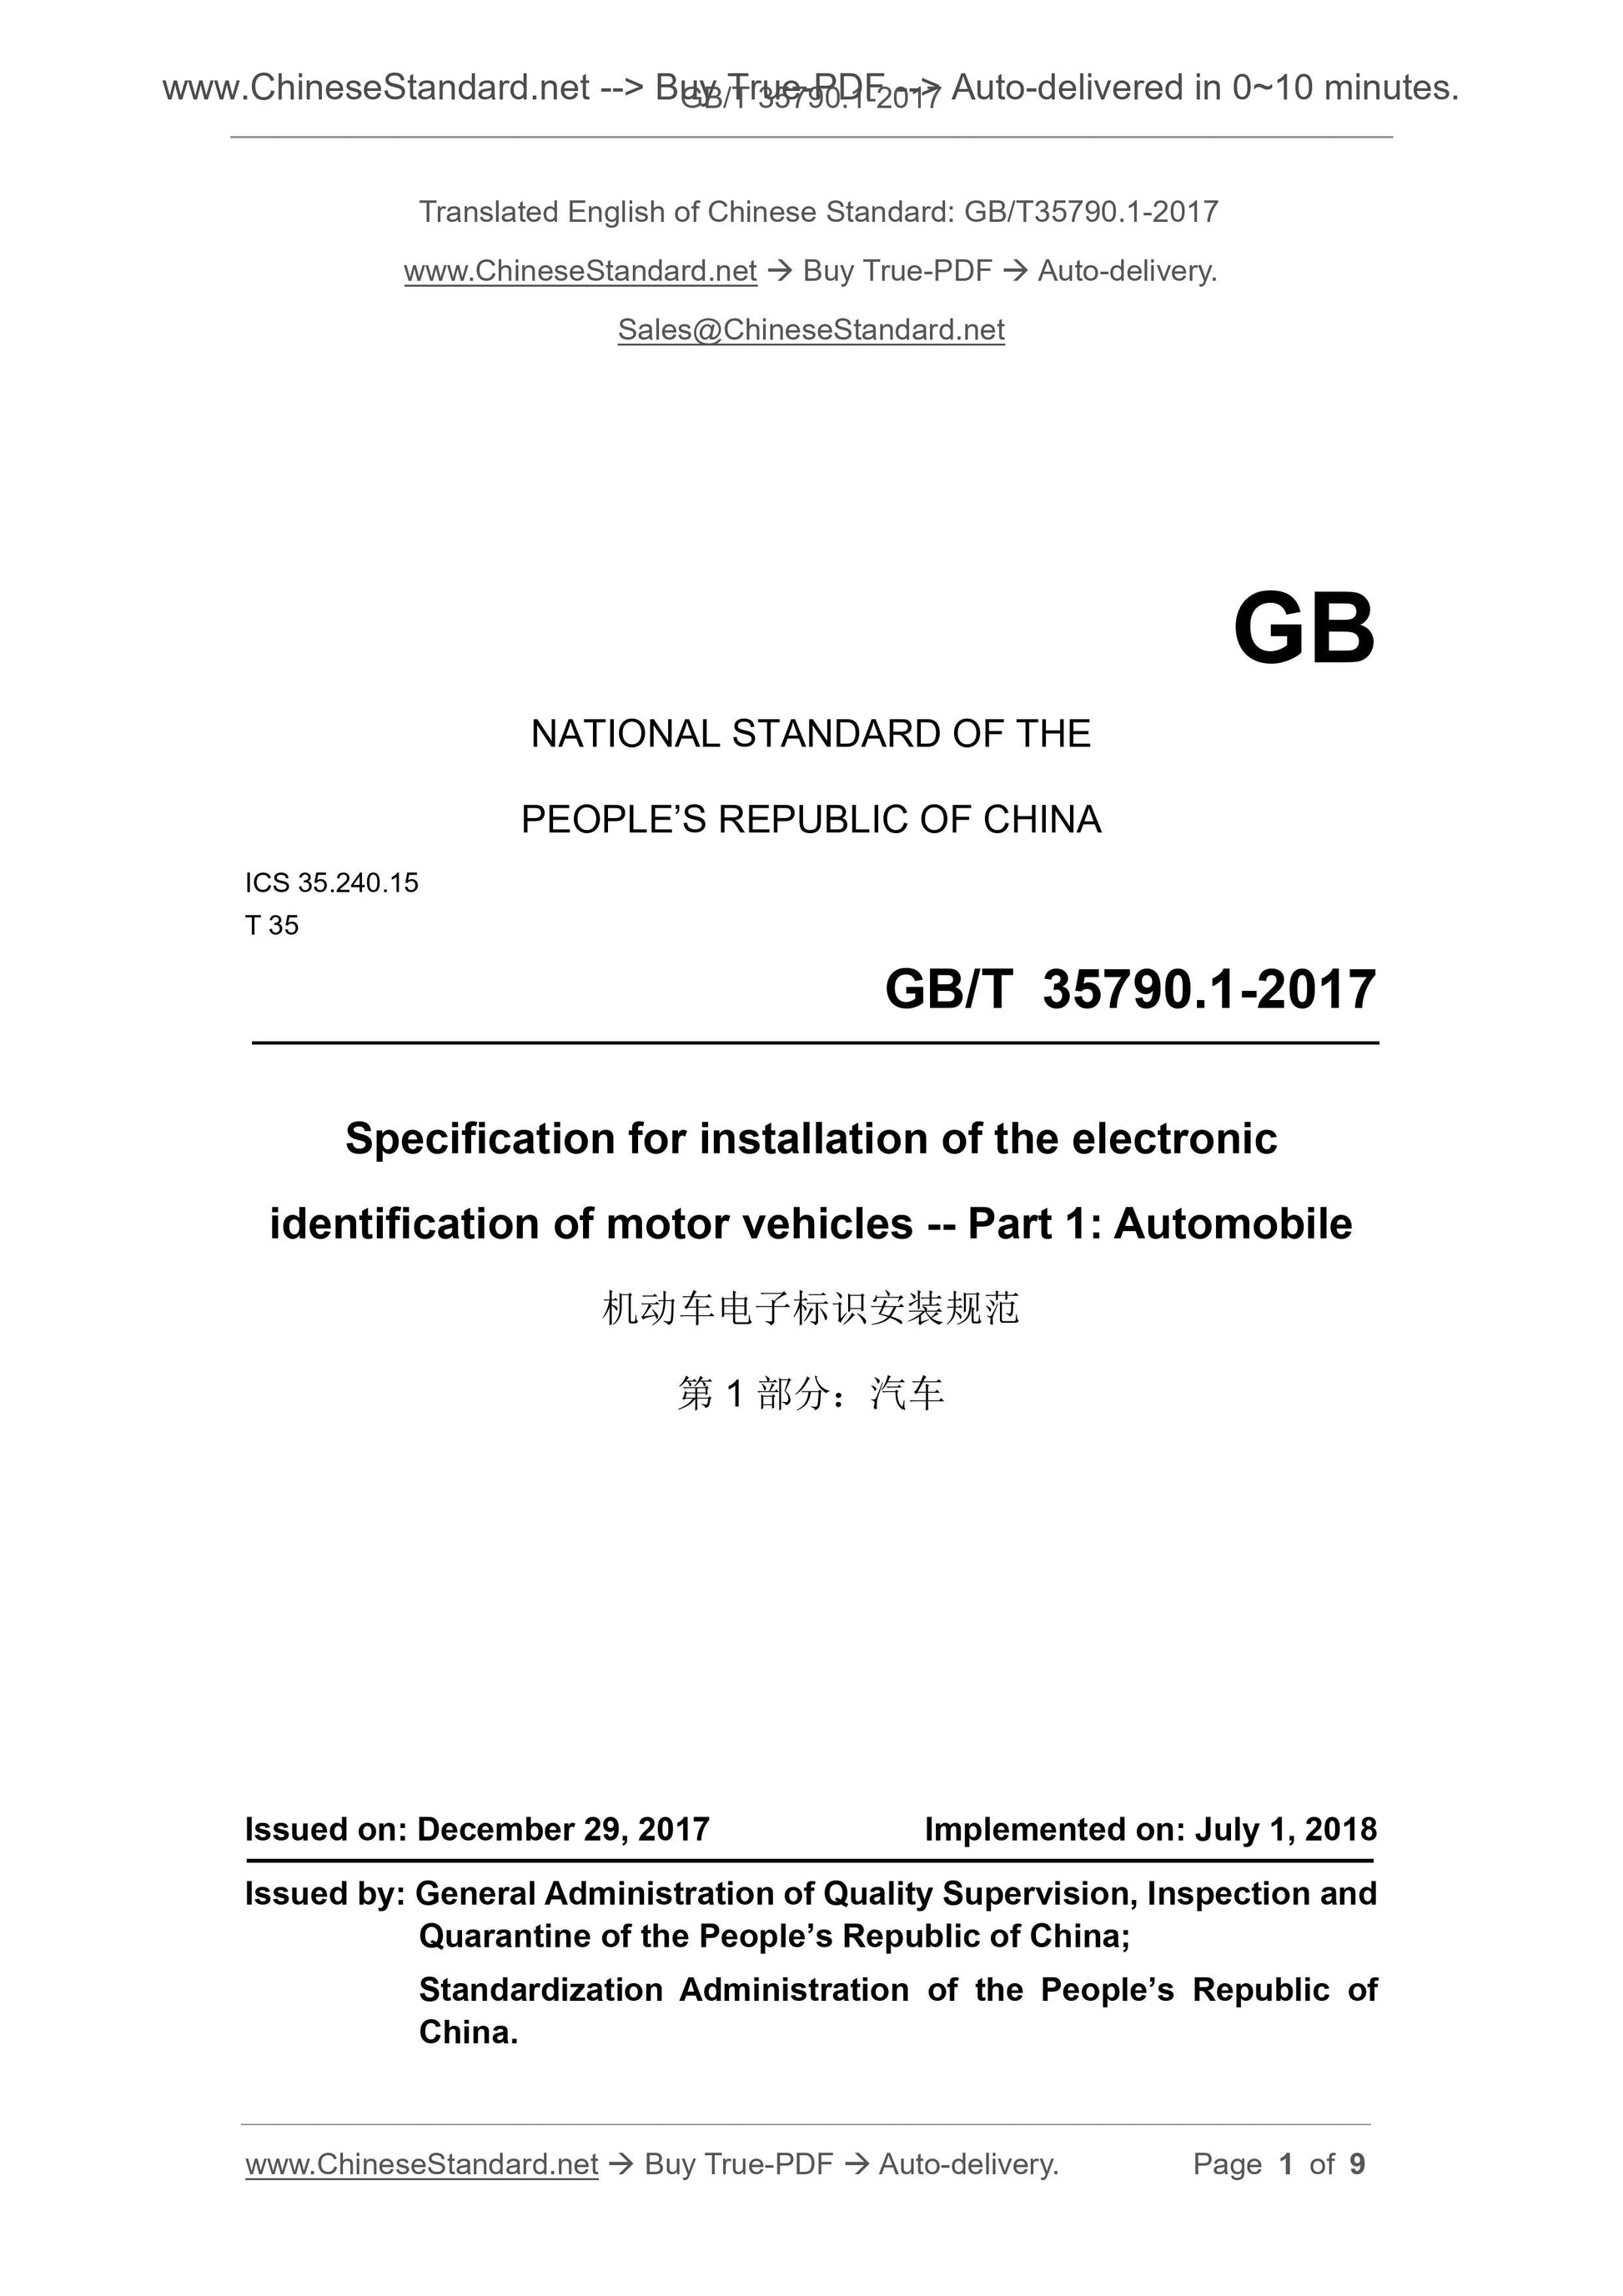 GB/T 35790.1-2017 Page 1